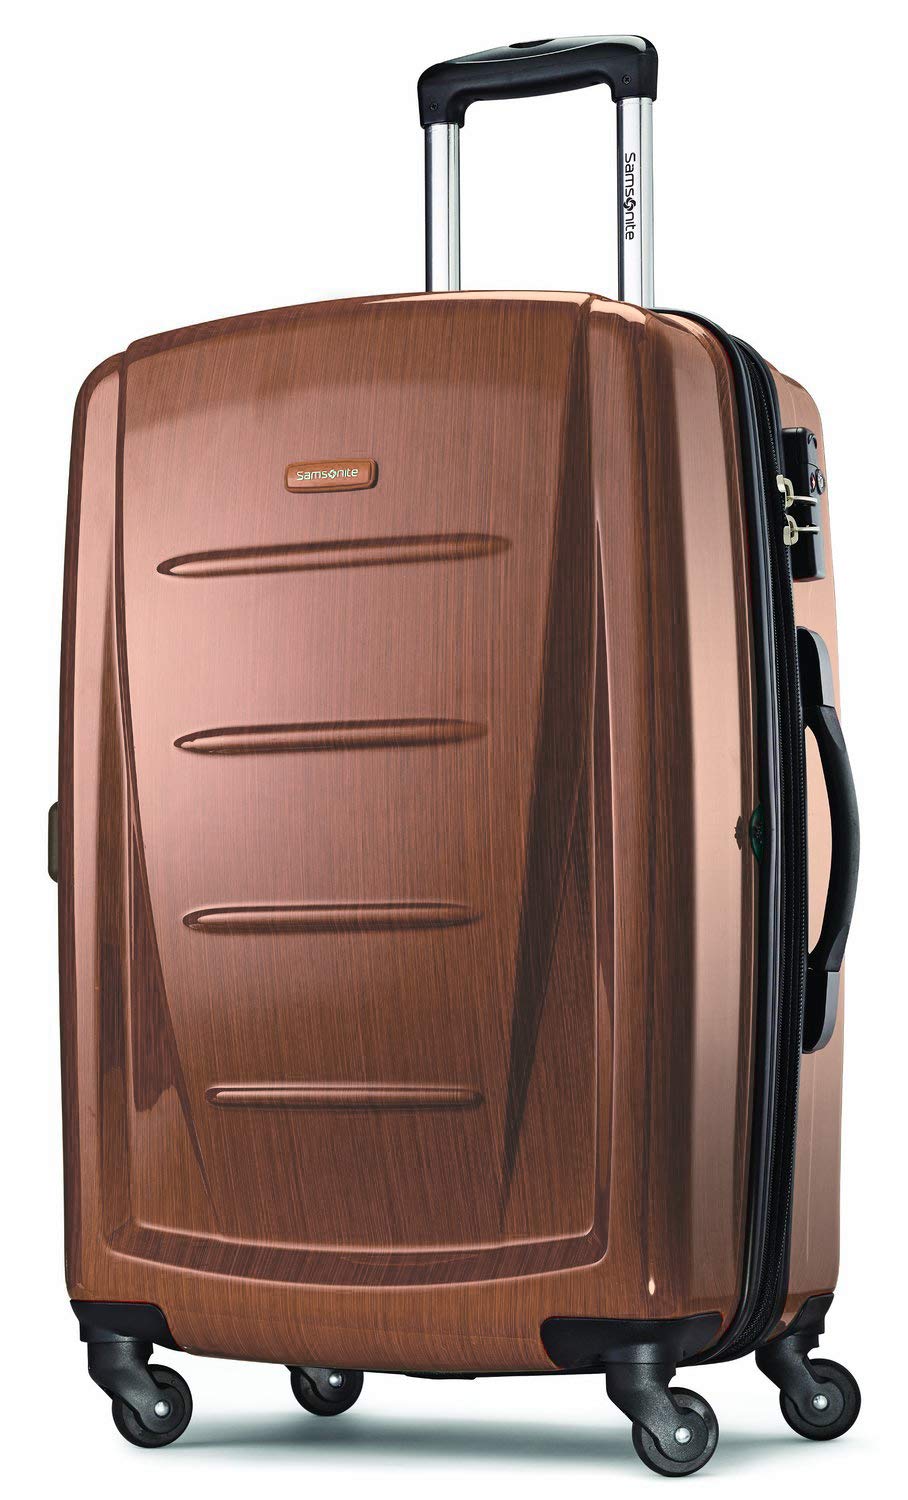 Samsonite Winfield 2 Hardside Luggage with Spinner Wheels - Rose Gold/Checked-Medium 24-Inch